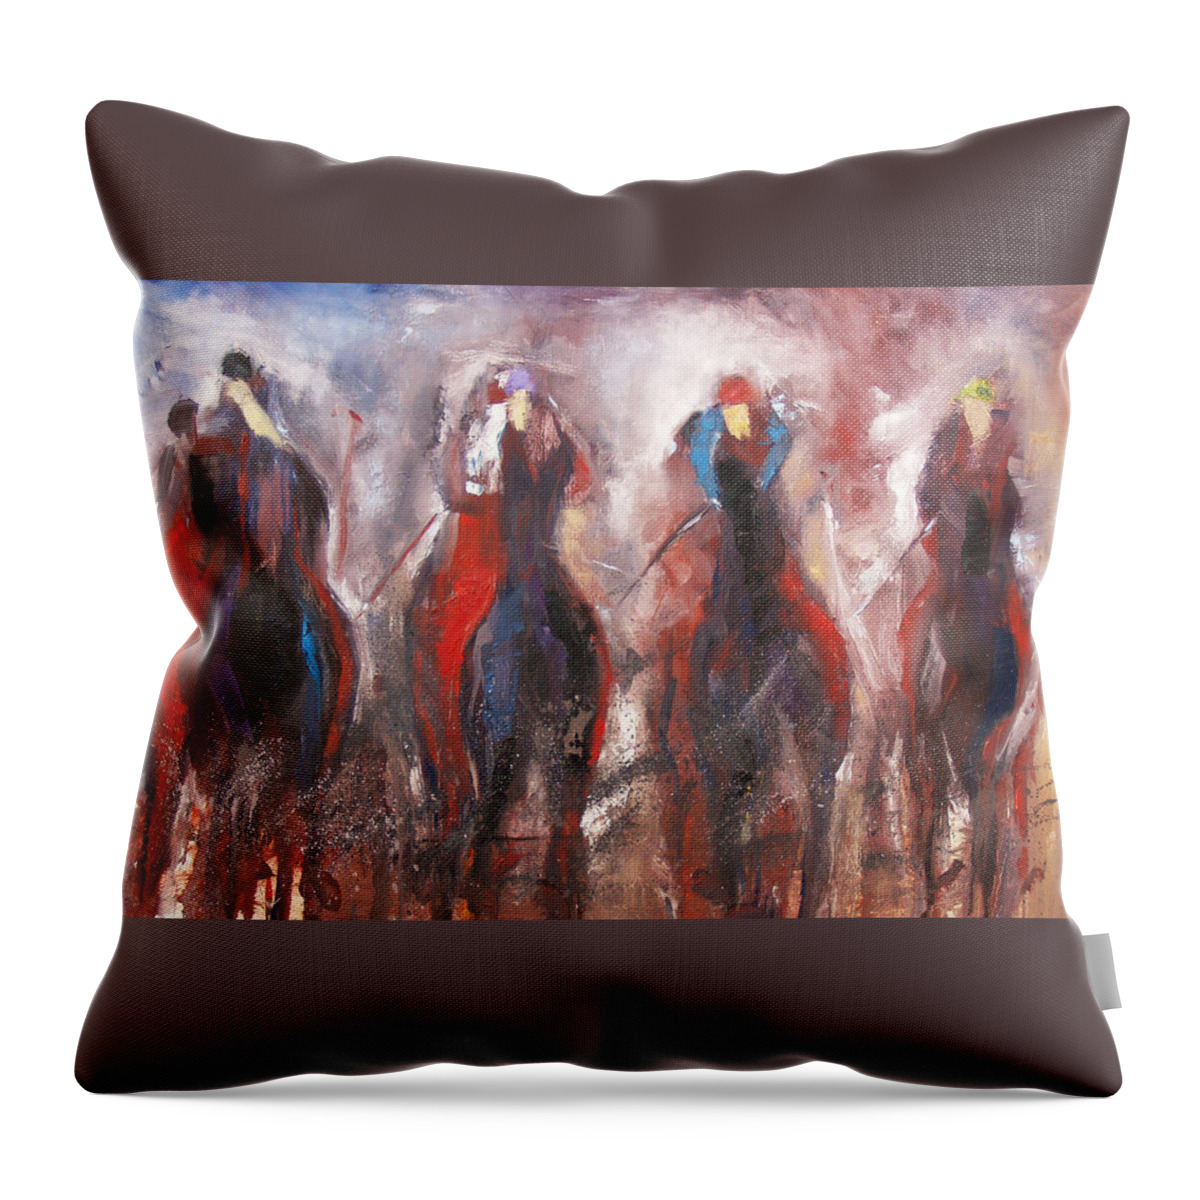 Horse Racing Throw Pillow featuring the painting The Four Horsemen by John Gholson